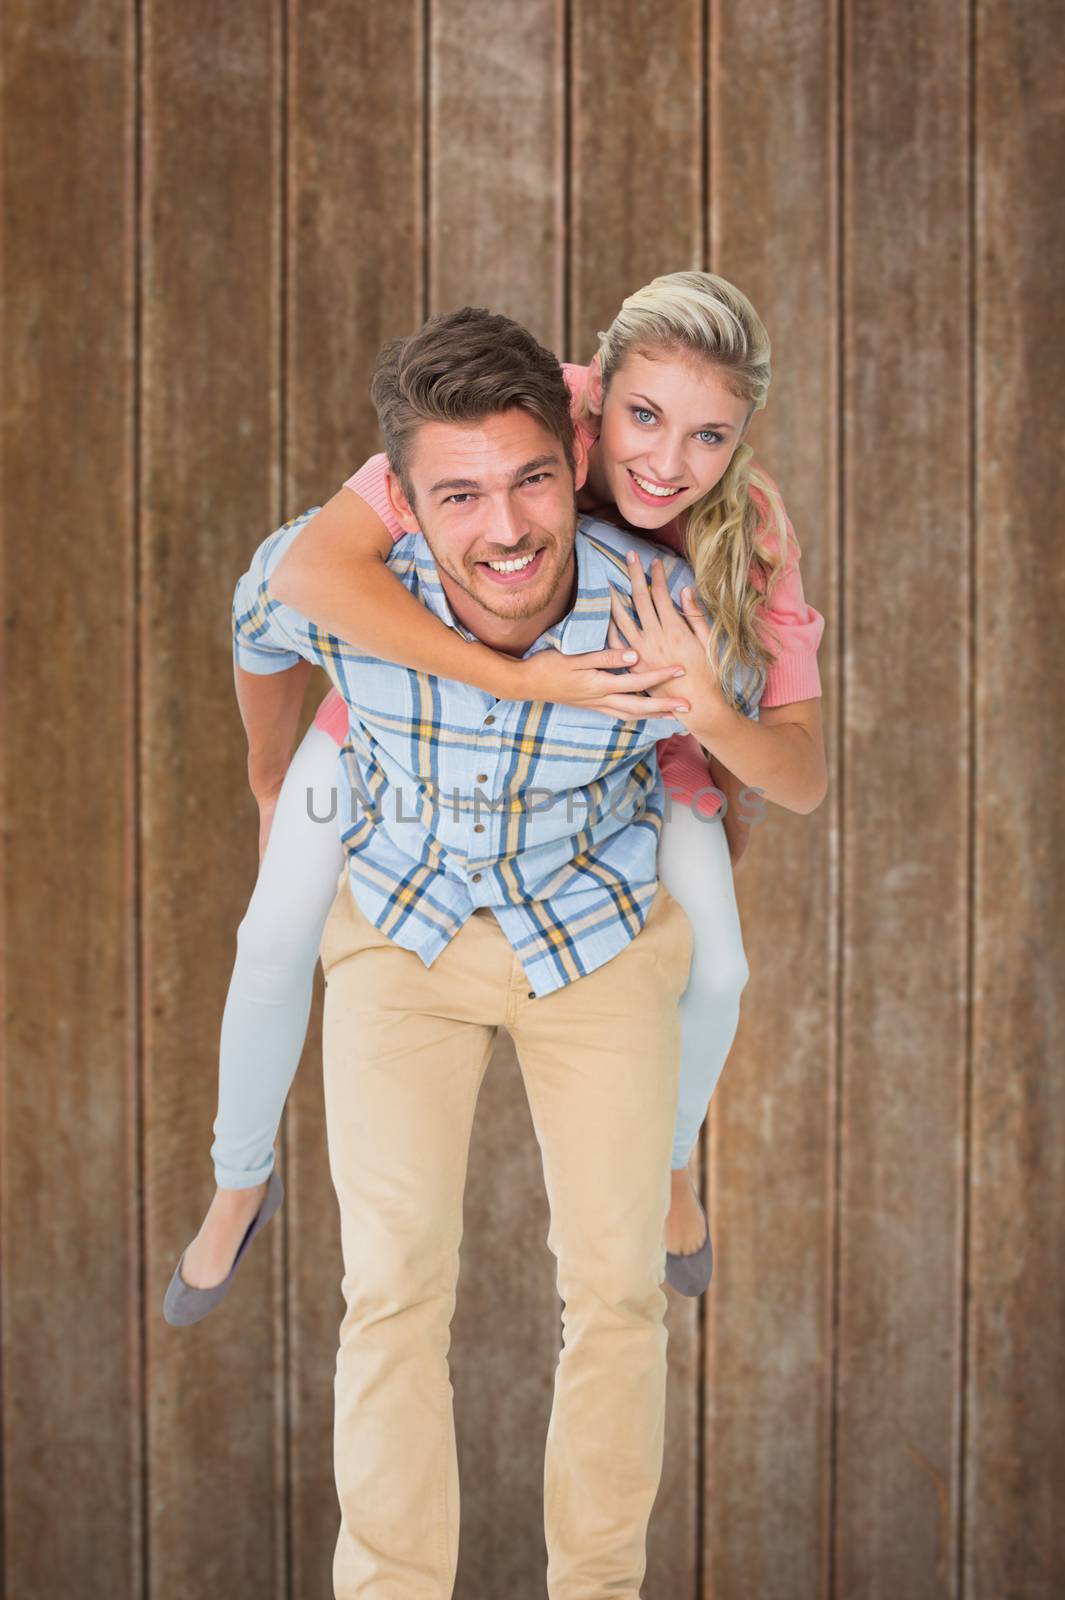 Handsome man giving piggy back to his girlfriend against wooden planks background